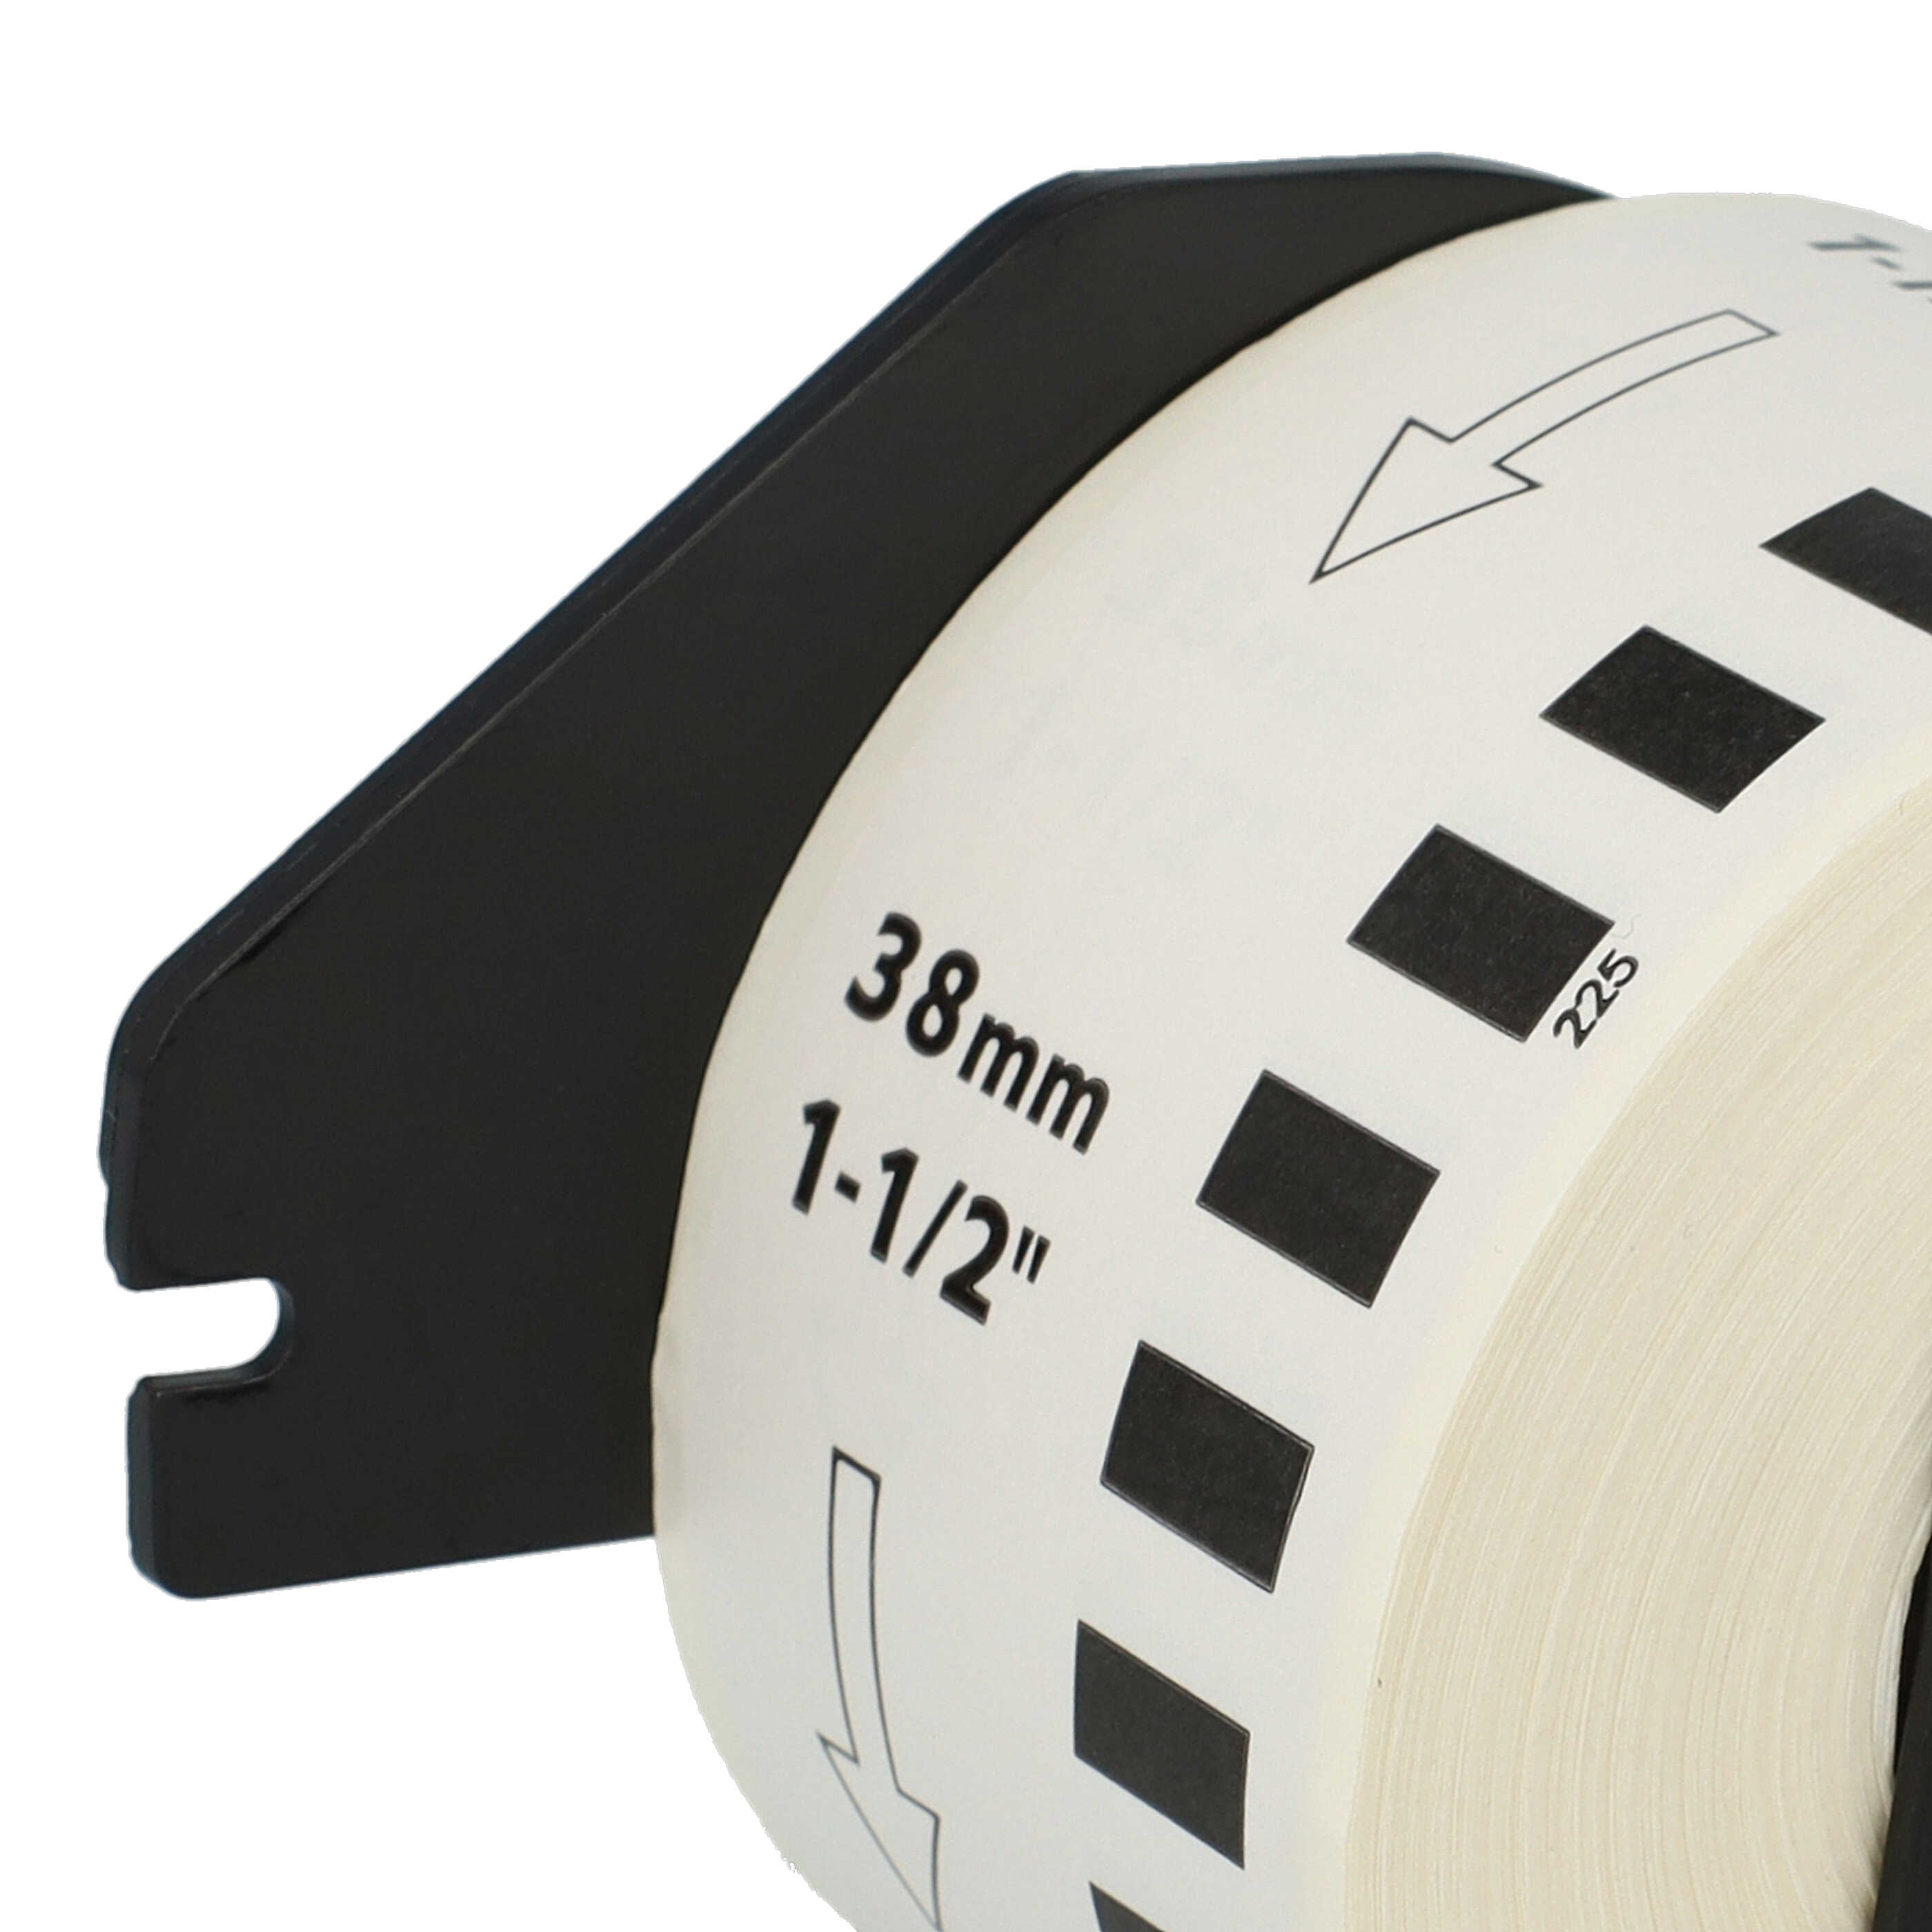 2x Labels replaces Brother DK-22225 for Labeller - 38 mm x 30.48m + Holder